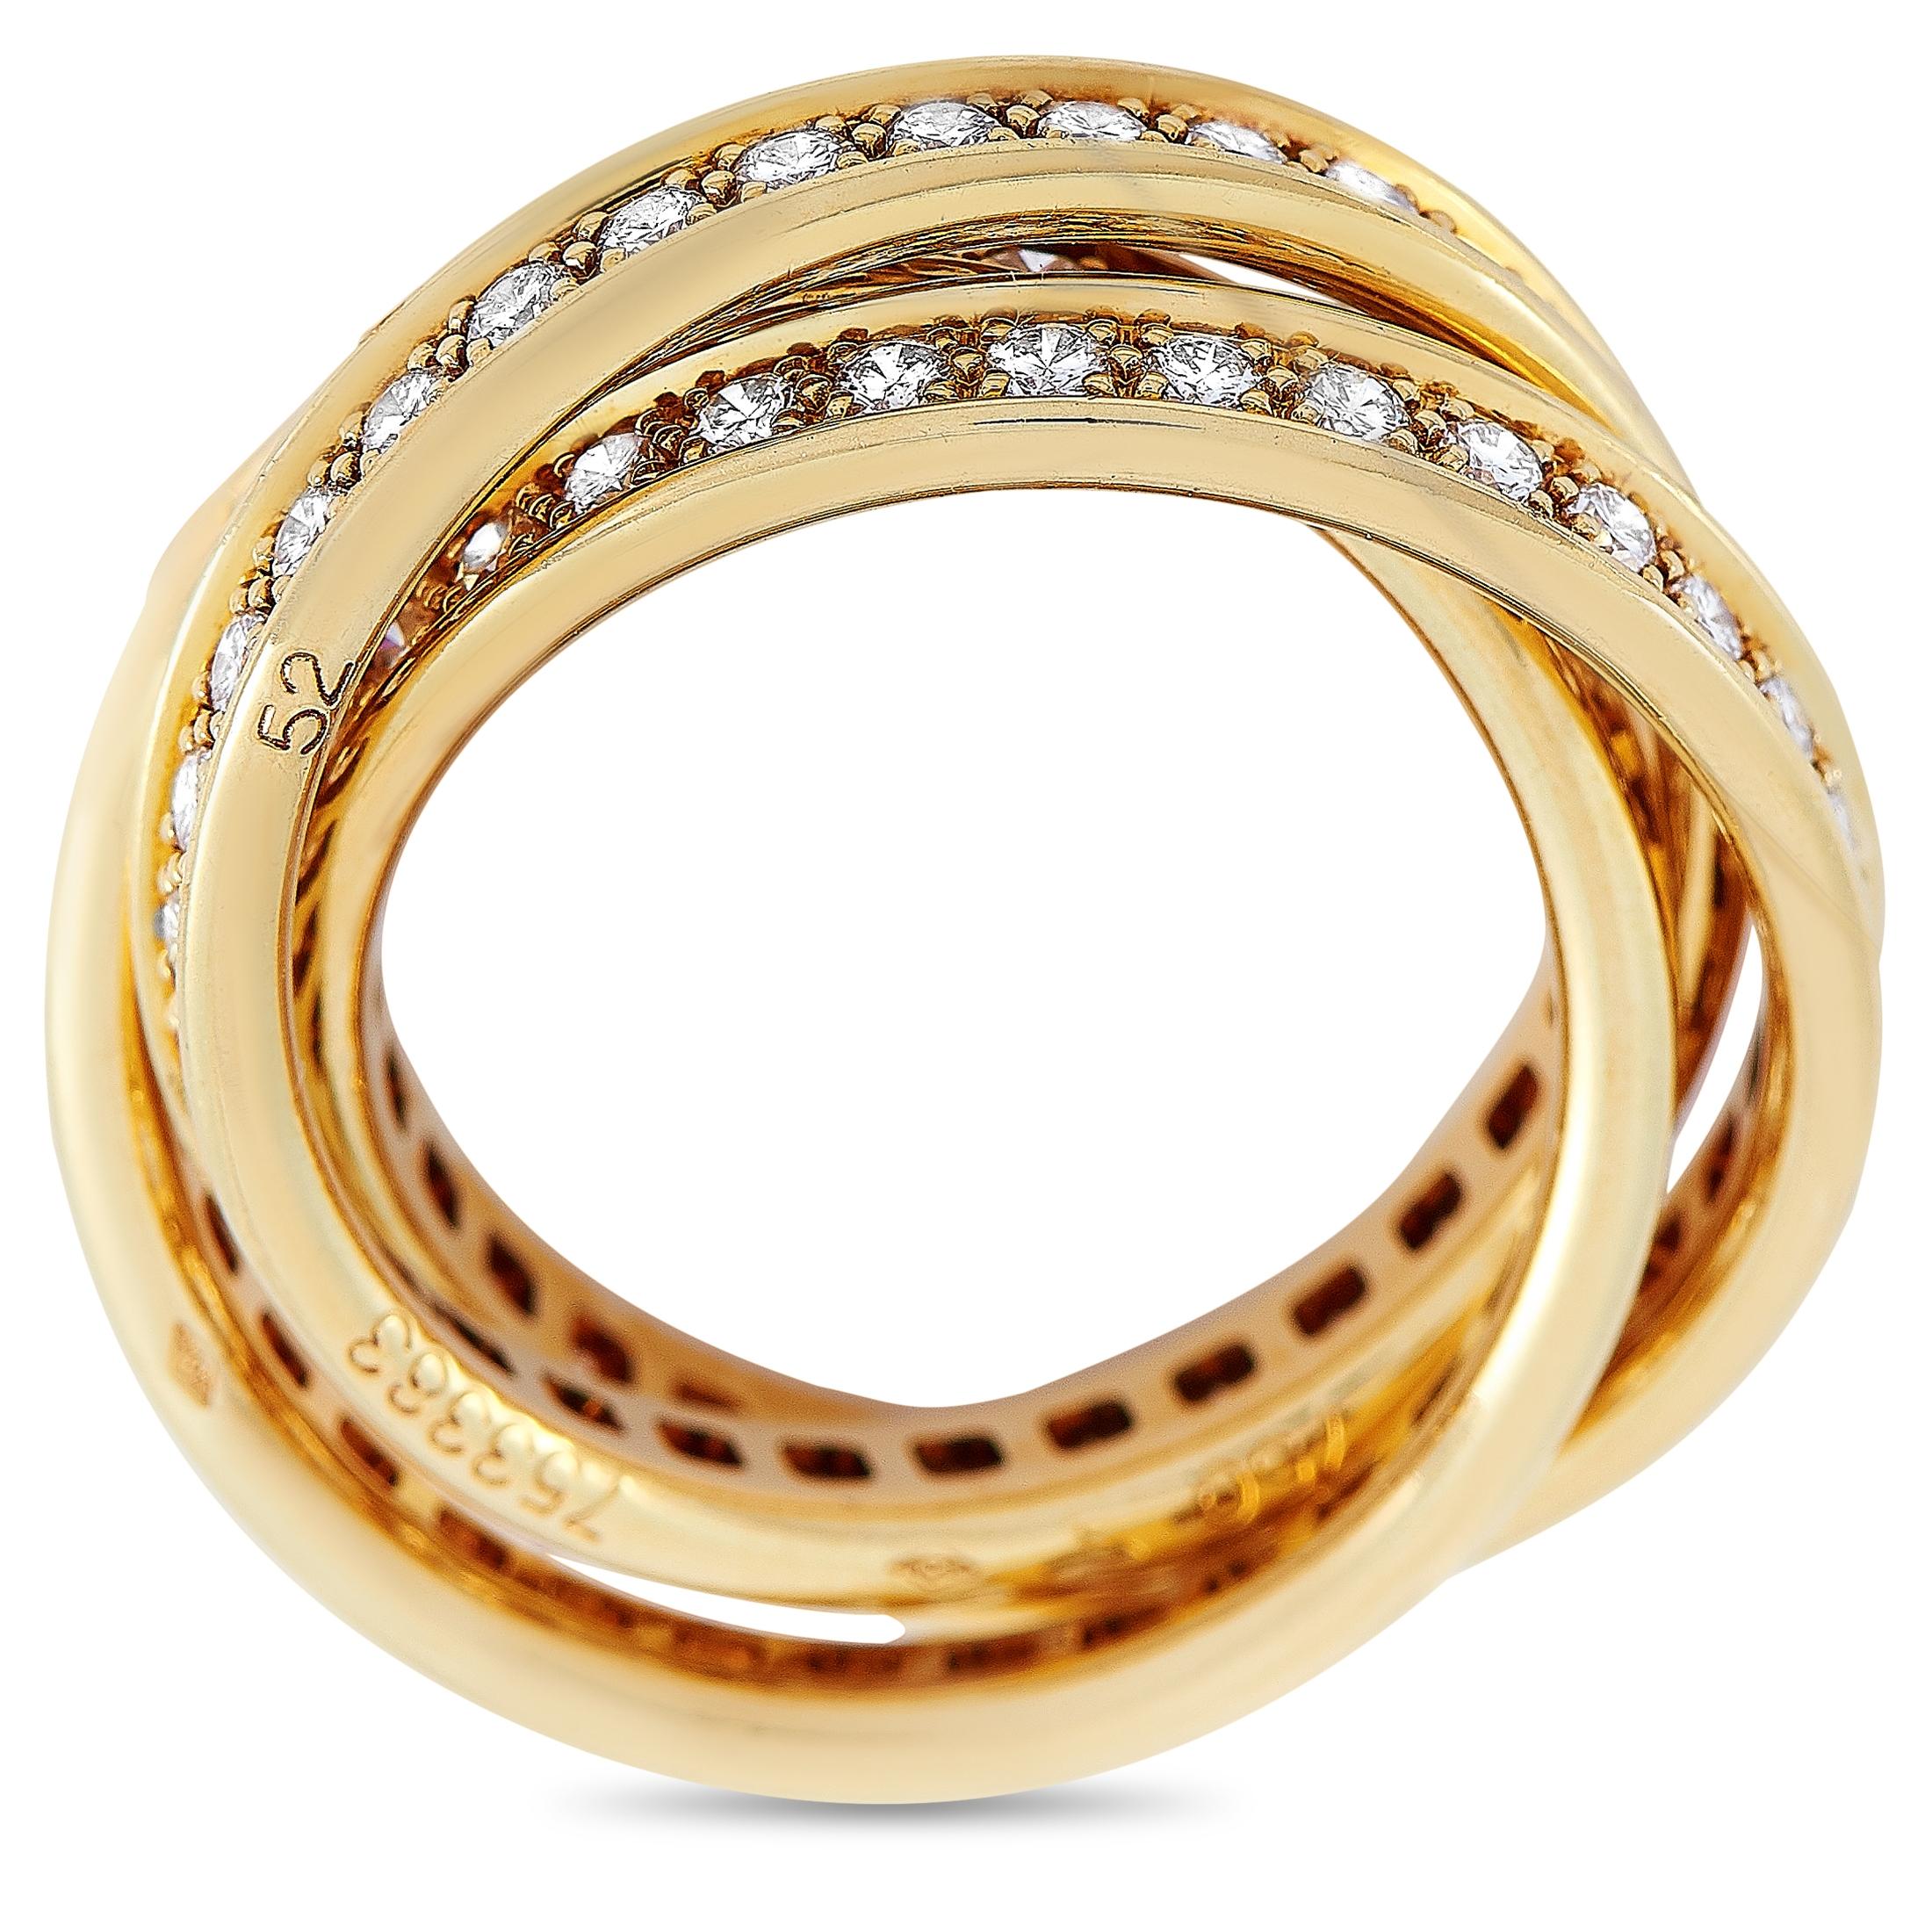 The Cartier “Trinity” ring is made of 18K yellow gold and embellished with diamonds. The ring boasts band thickness of 3 mm.
 
 This jewelry piece is offered in estate condition and includes the manufacturer’s box and papers.